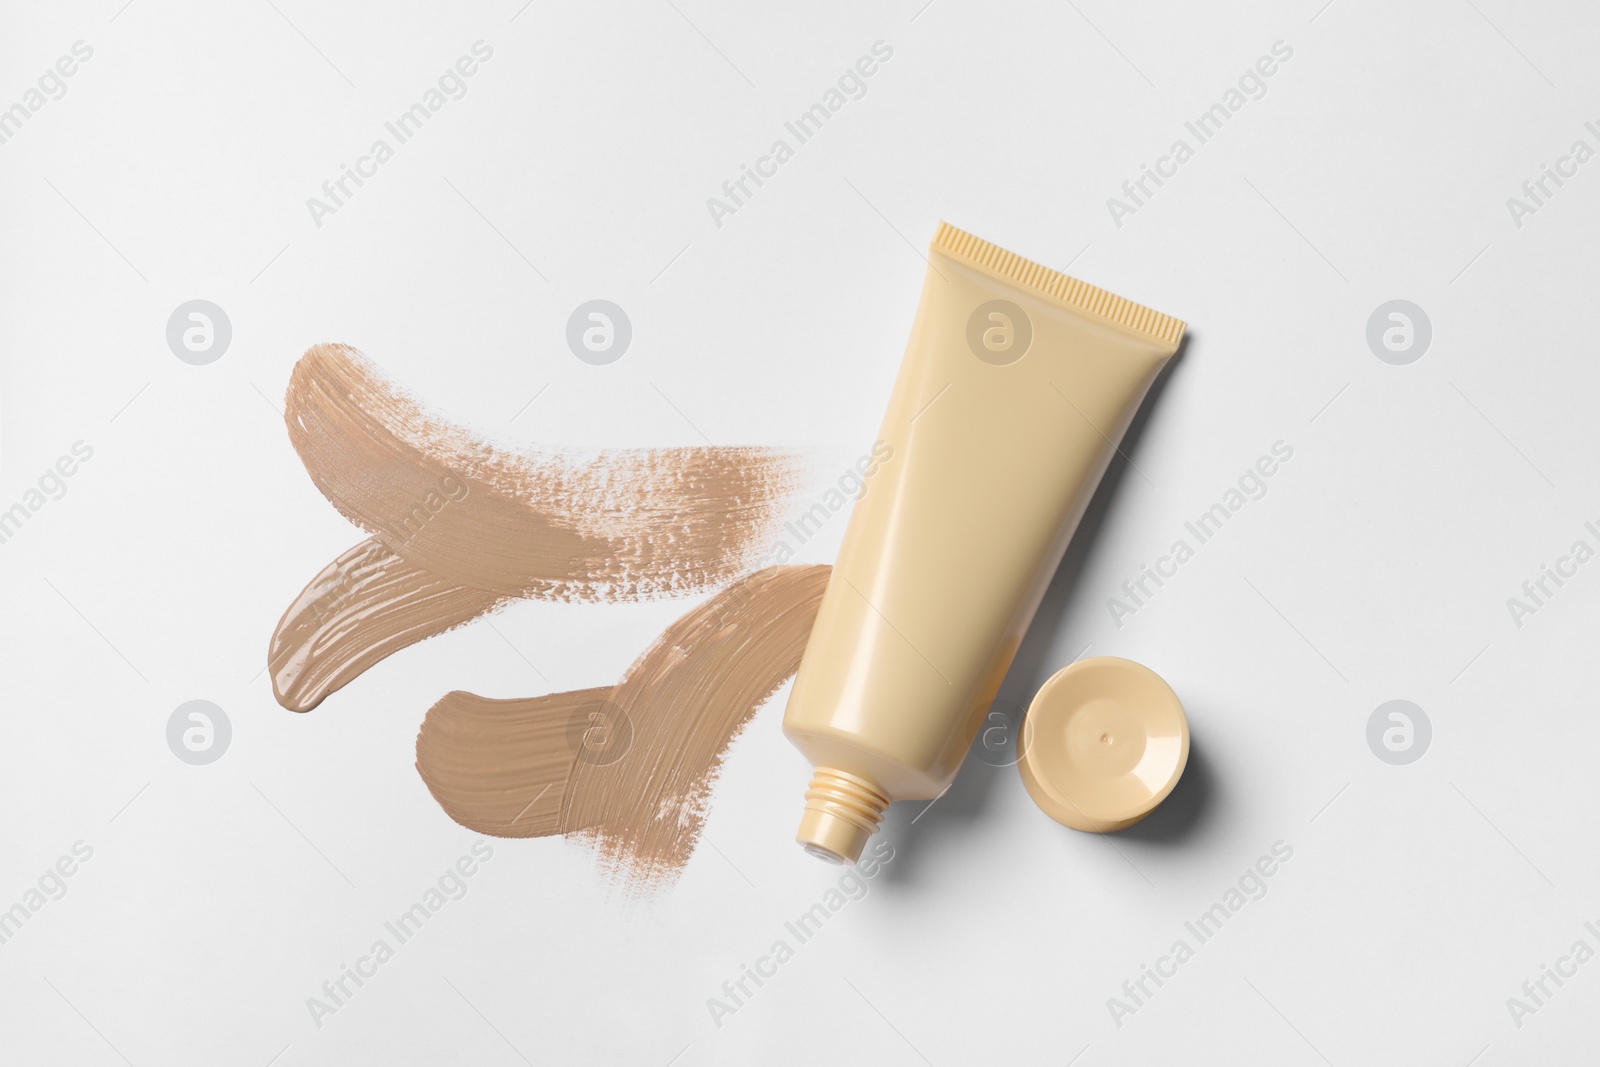 Photo of Foundation and swatches on white background, top view